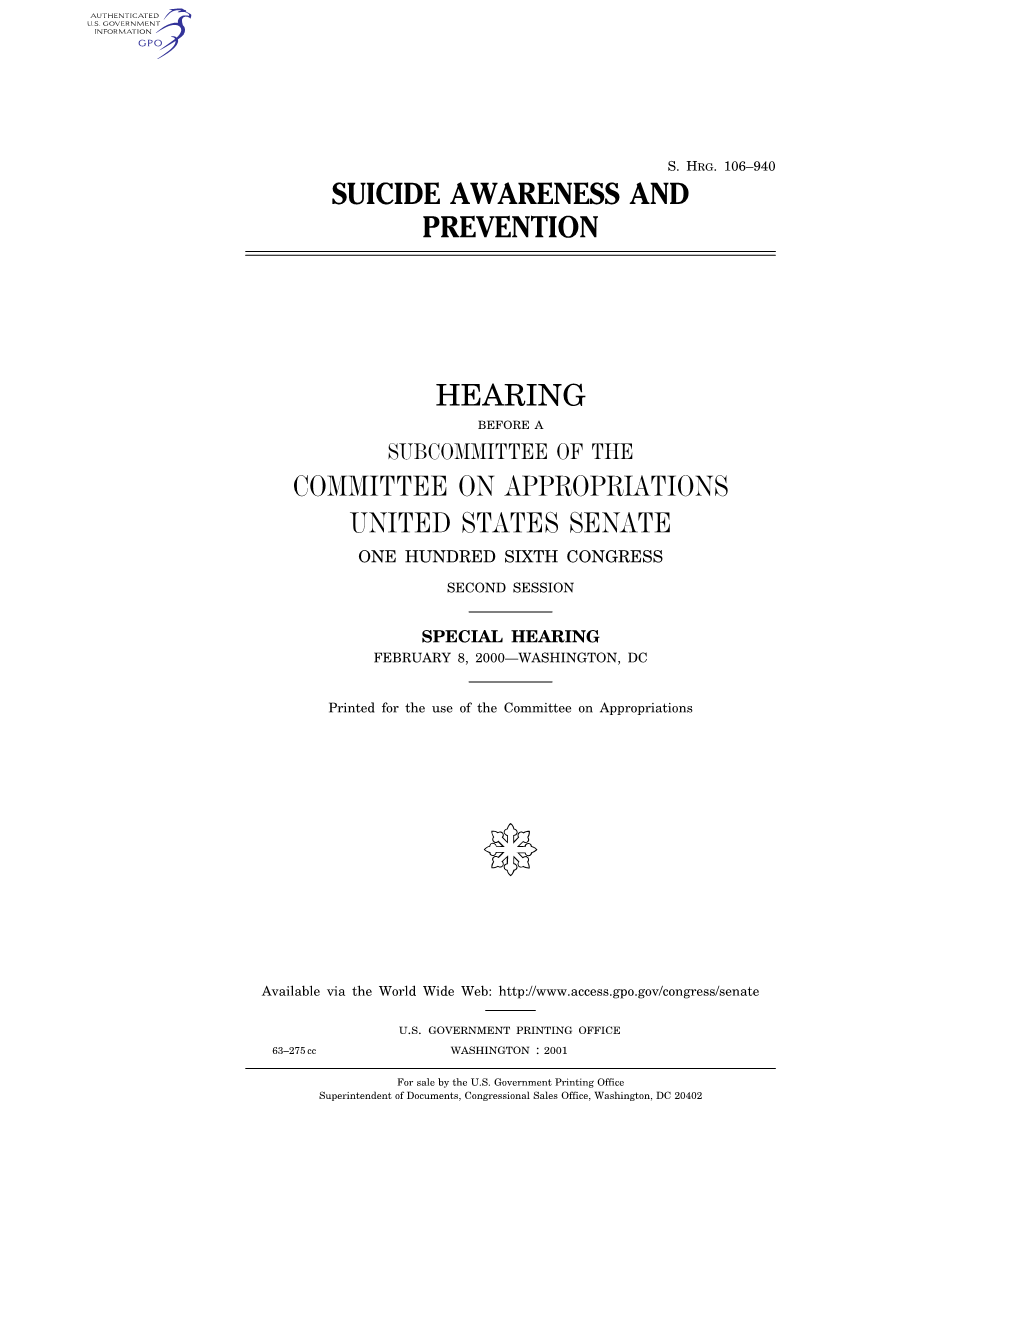 Suicide Awareness and Prevention Hearing Committee